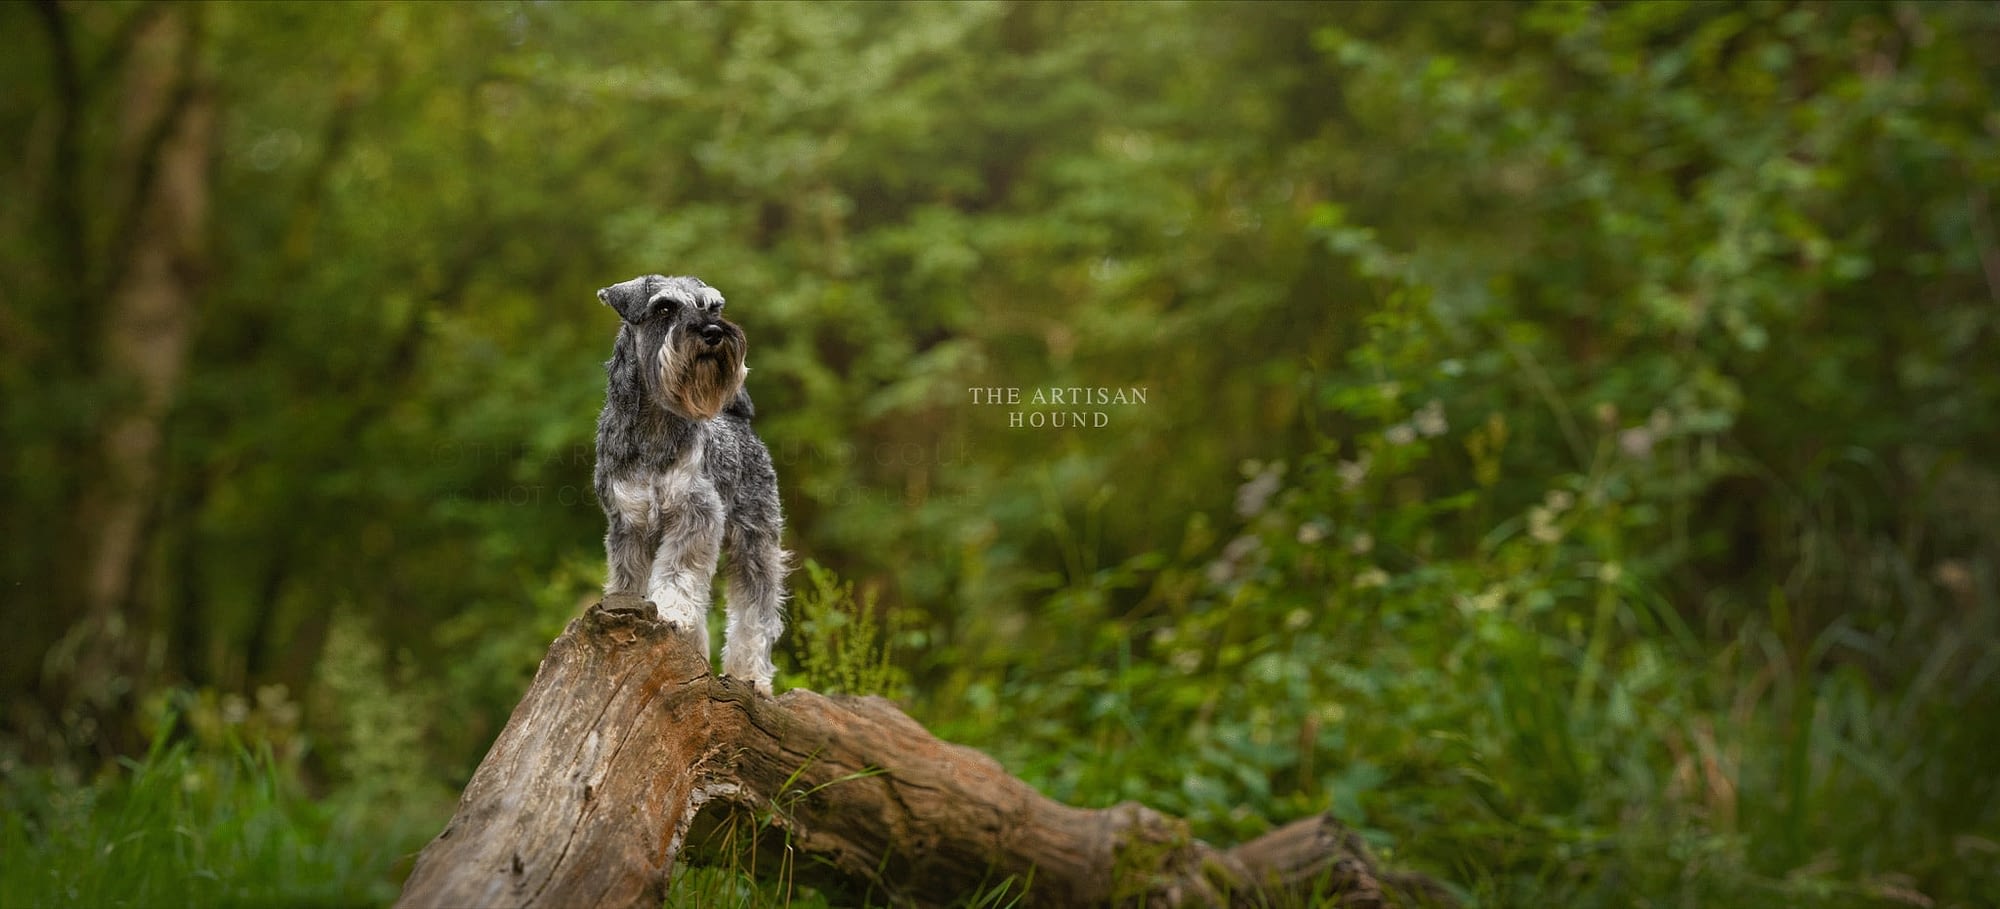 Schnauzer dog standing on small log in woodland